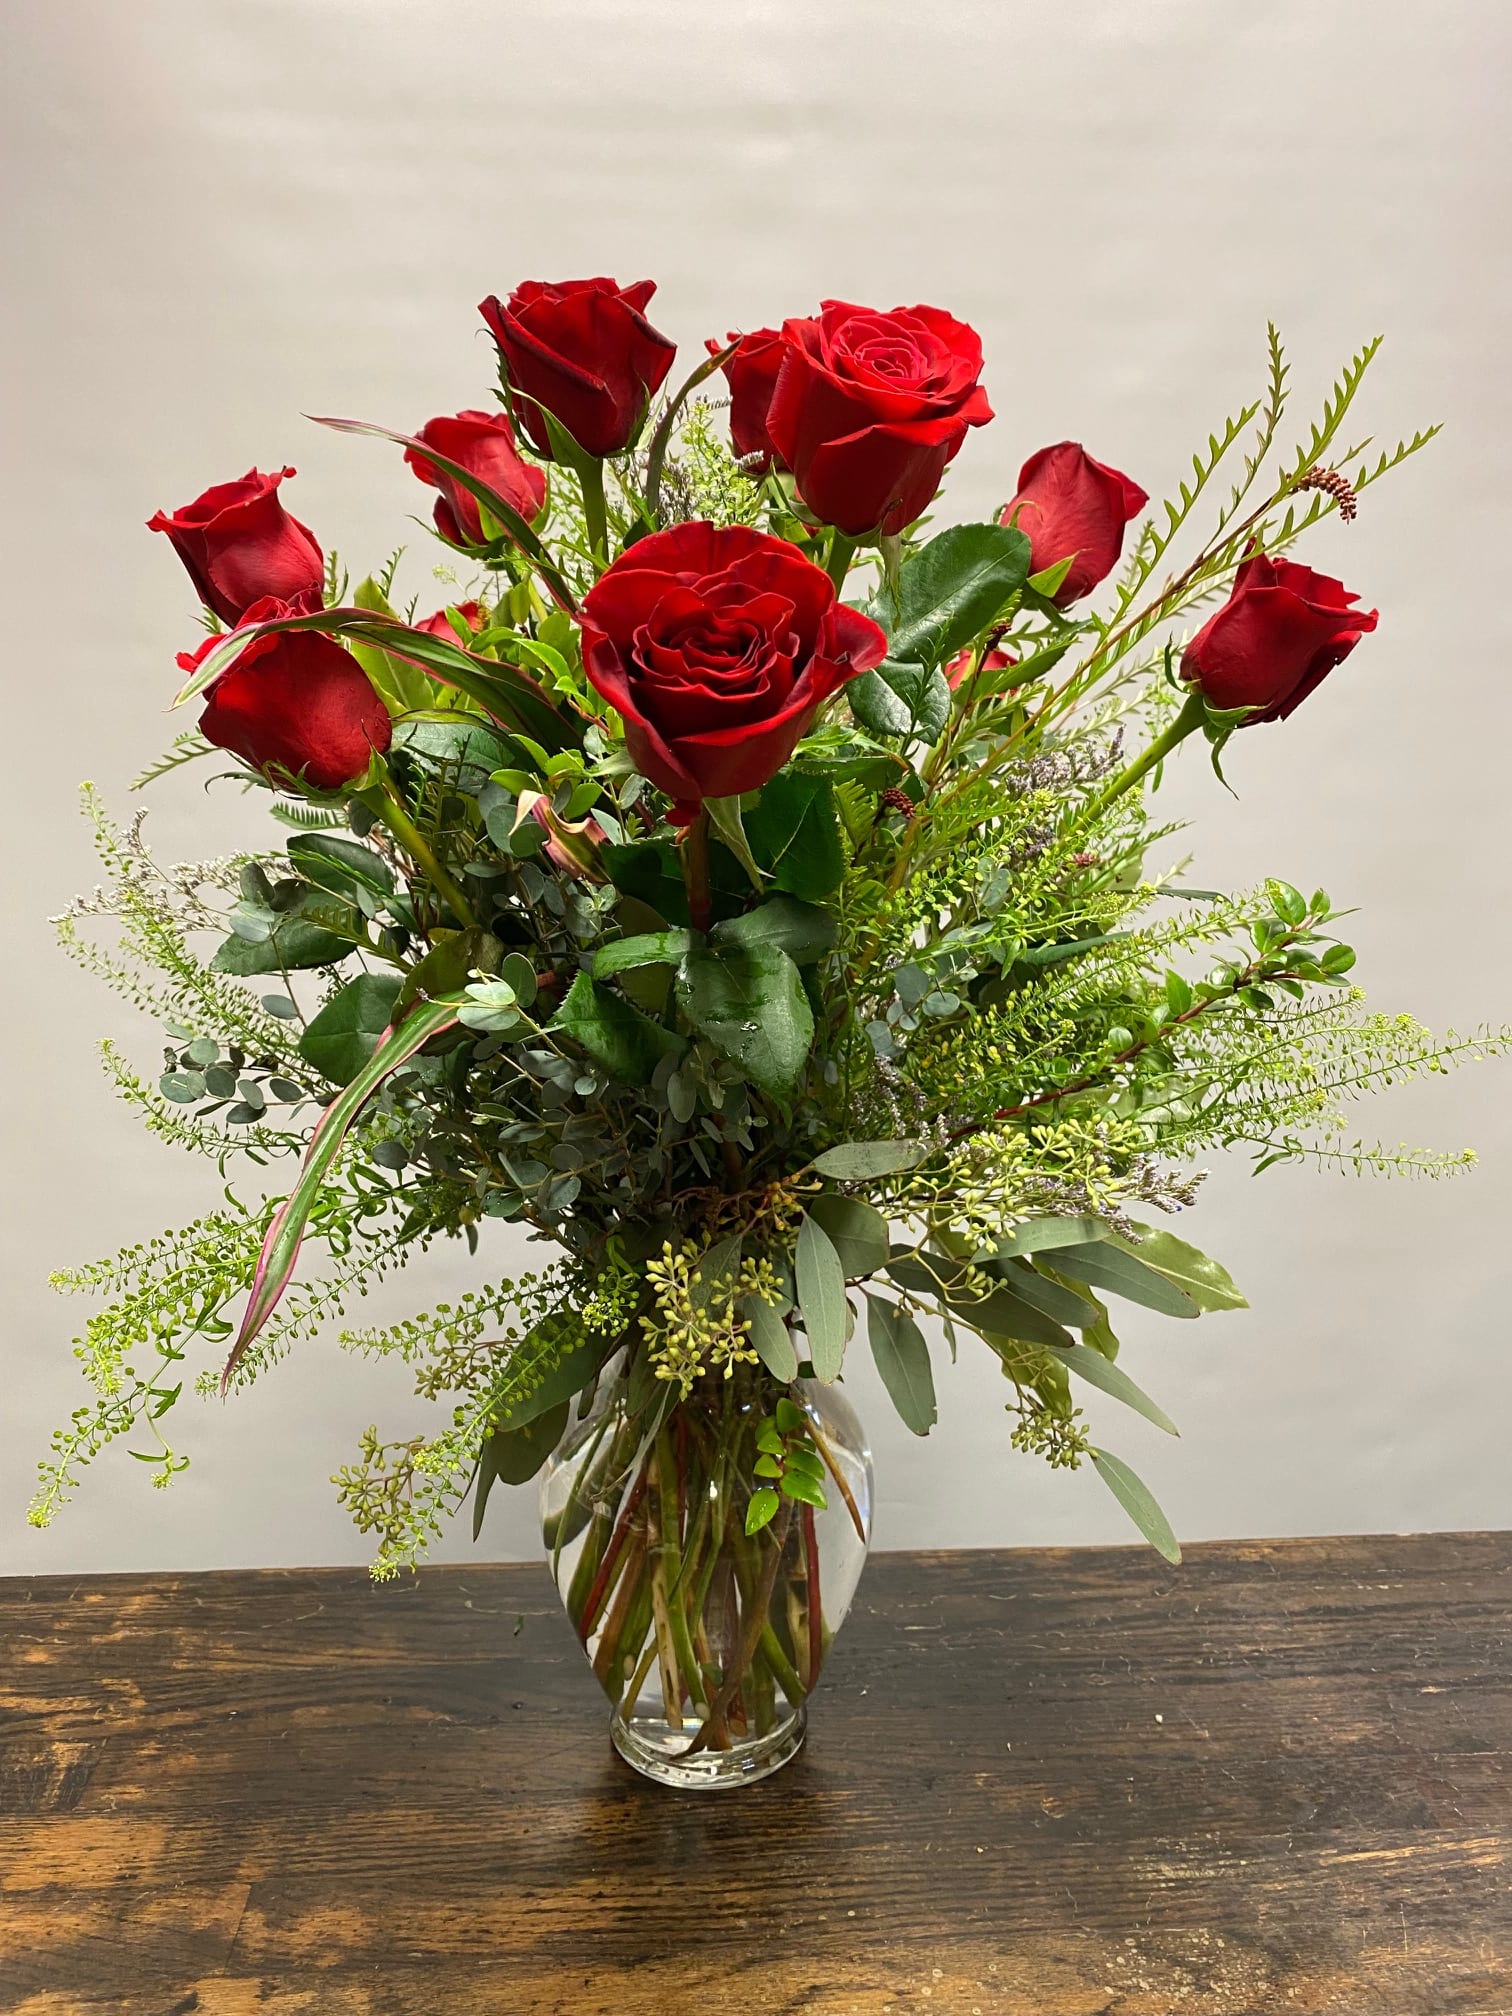 Only Red Rose Arrangement - This is a Red Rose Arrangement.